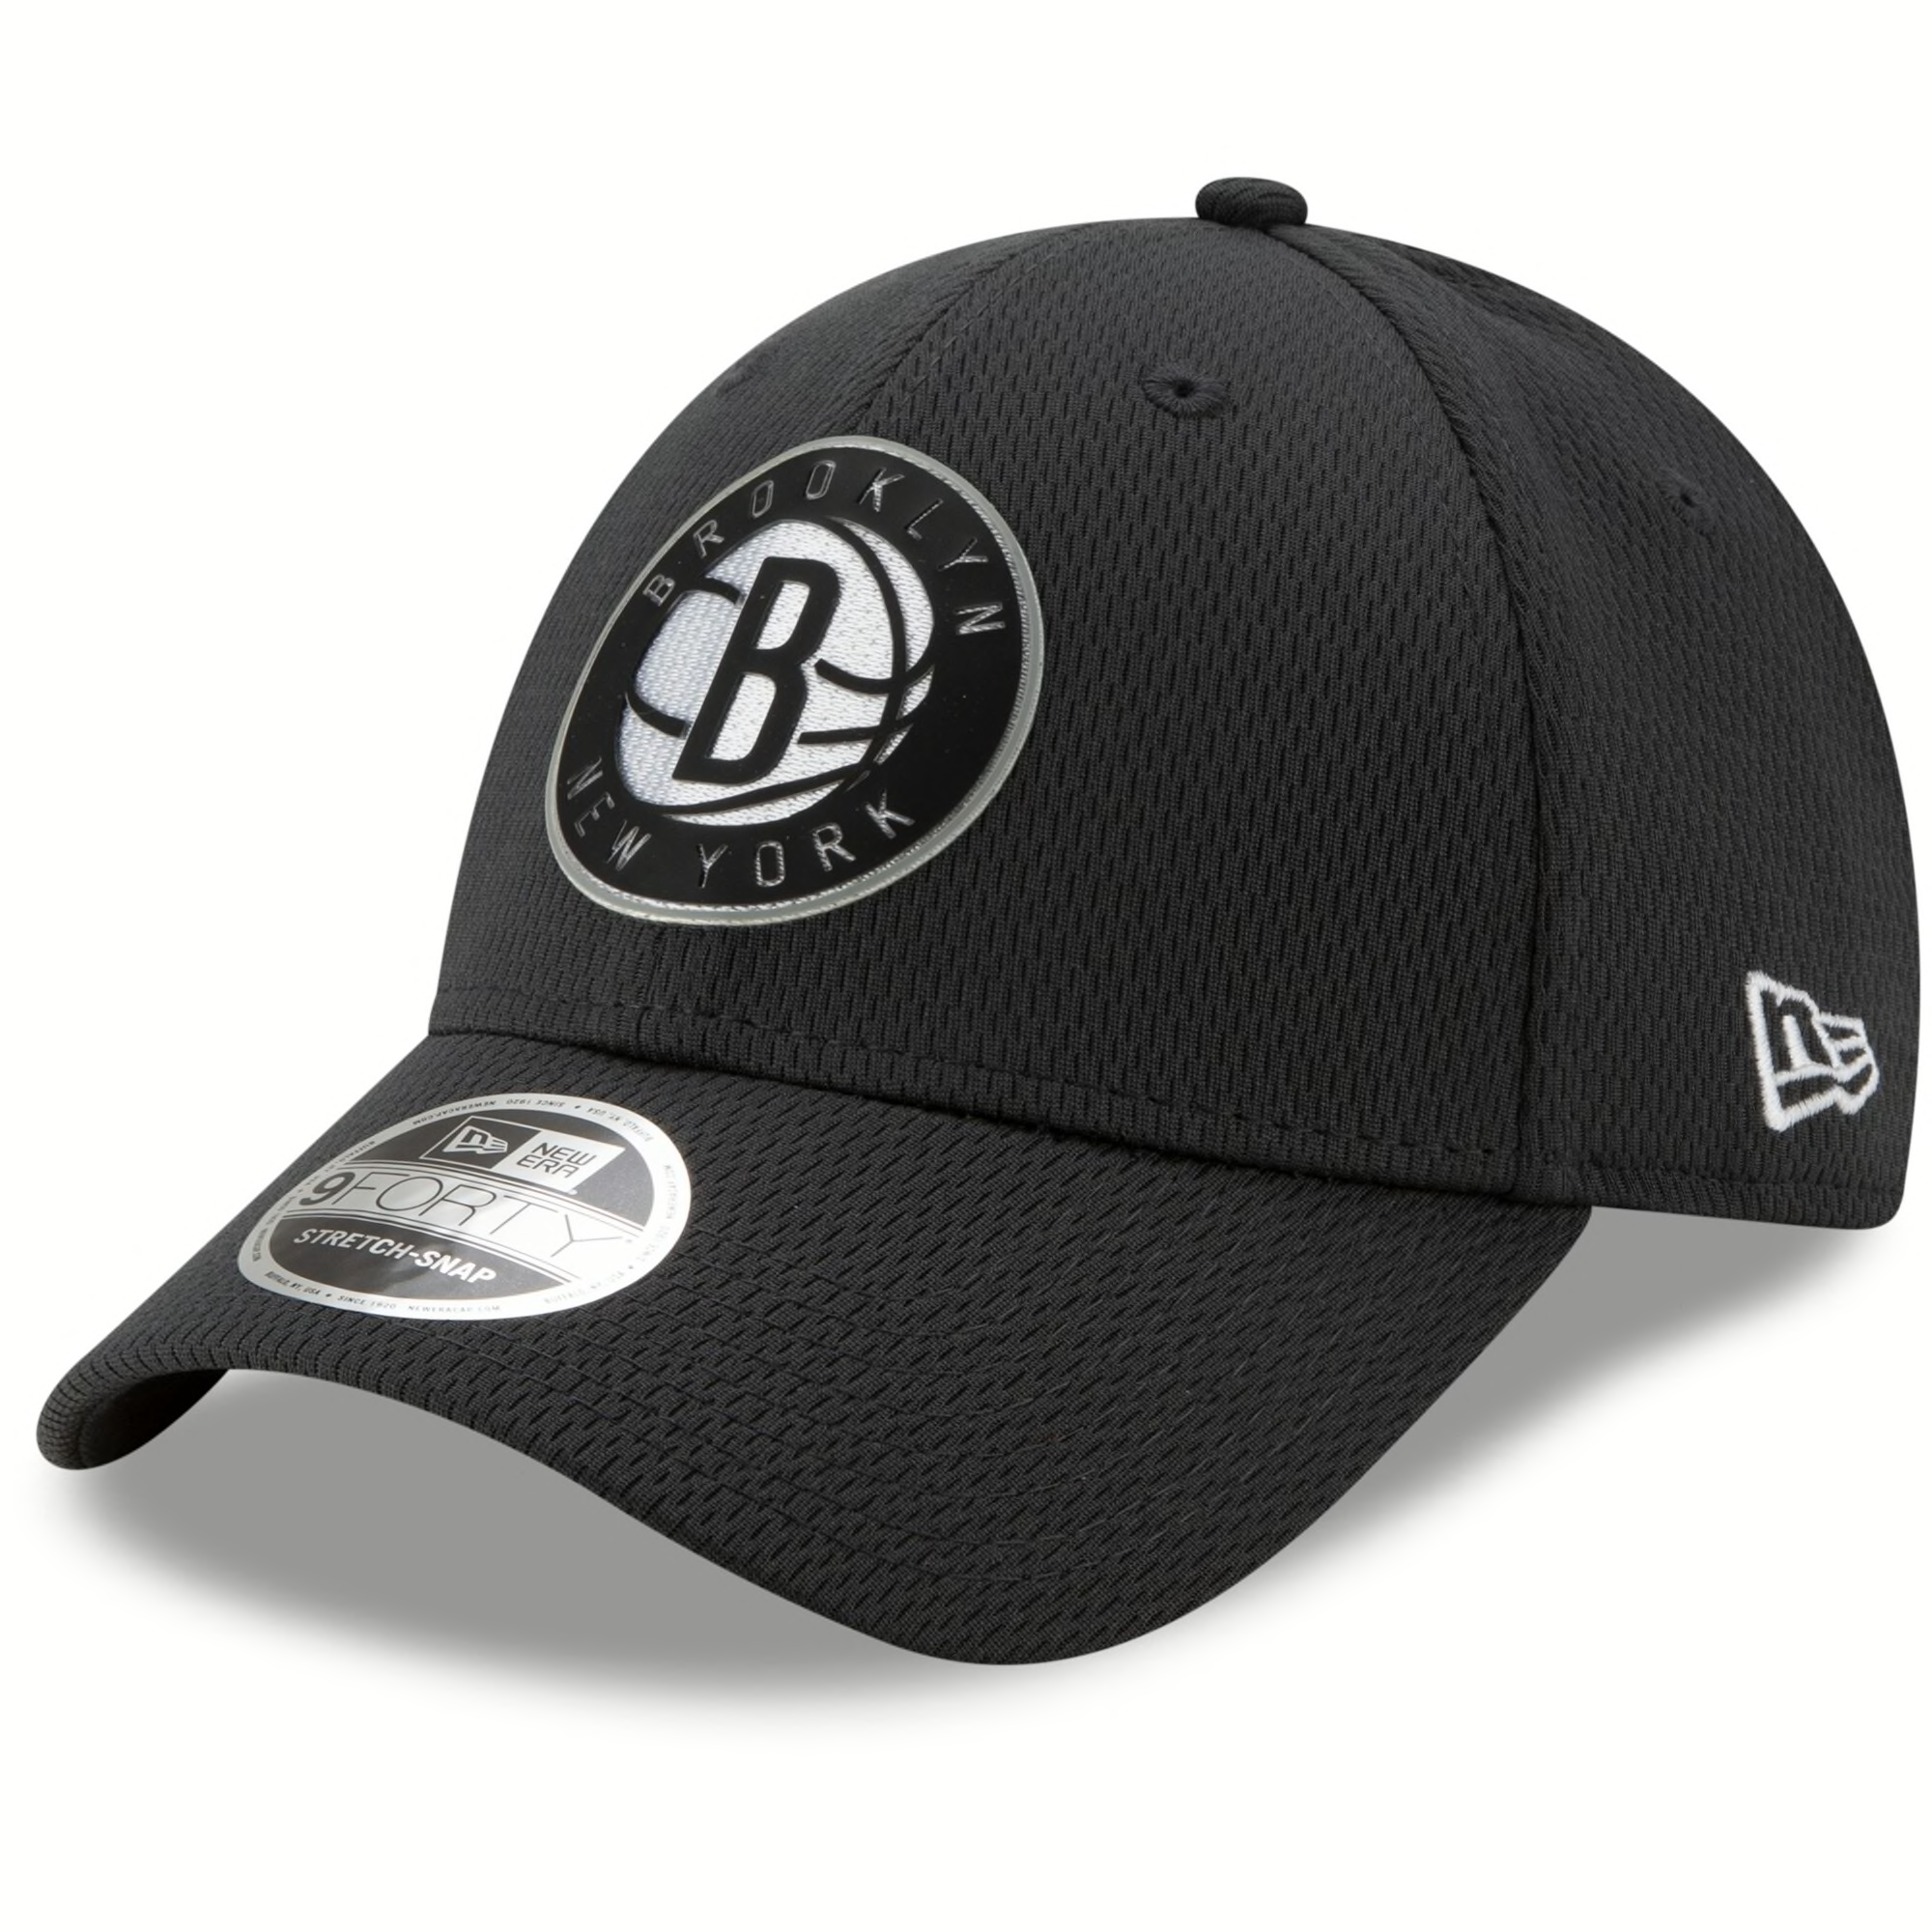 Father’s Day gifts for the Brooklyn Nets fan